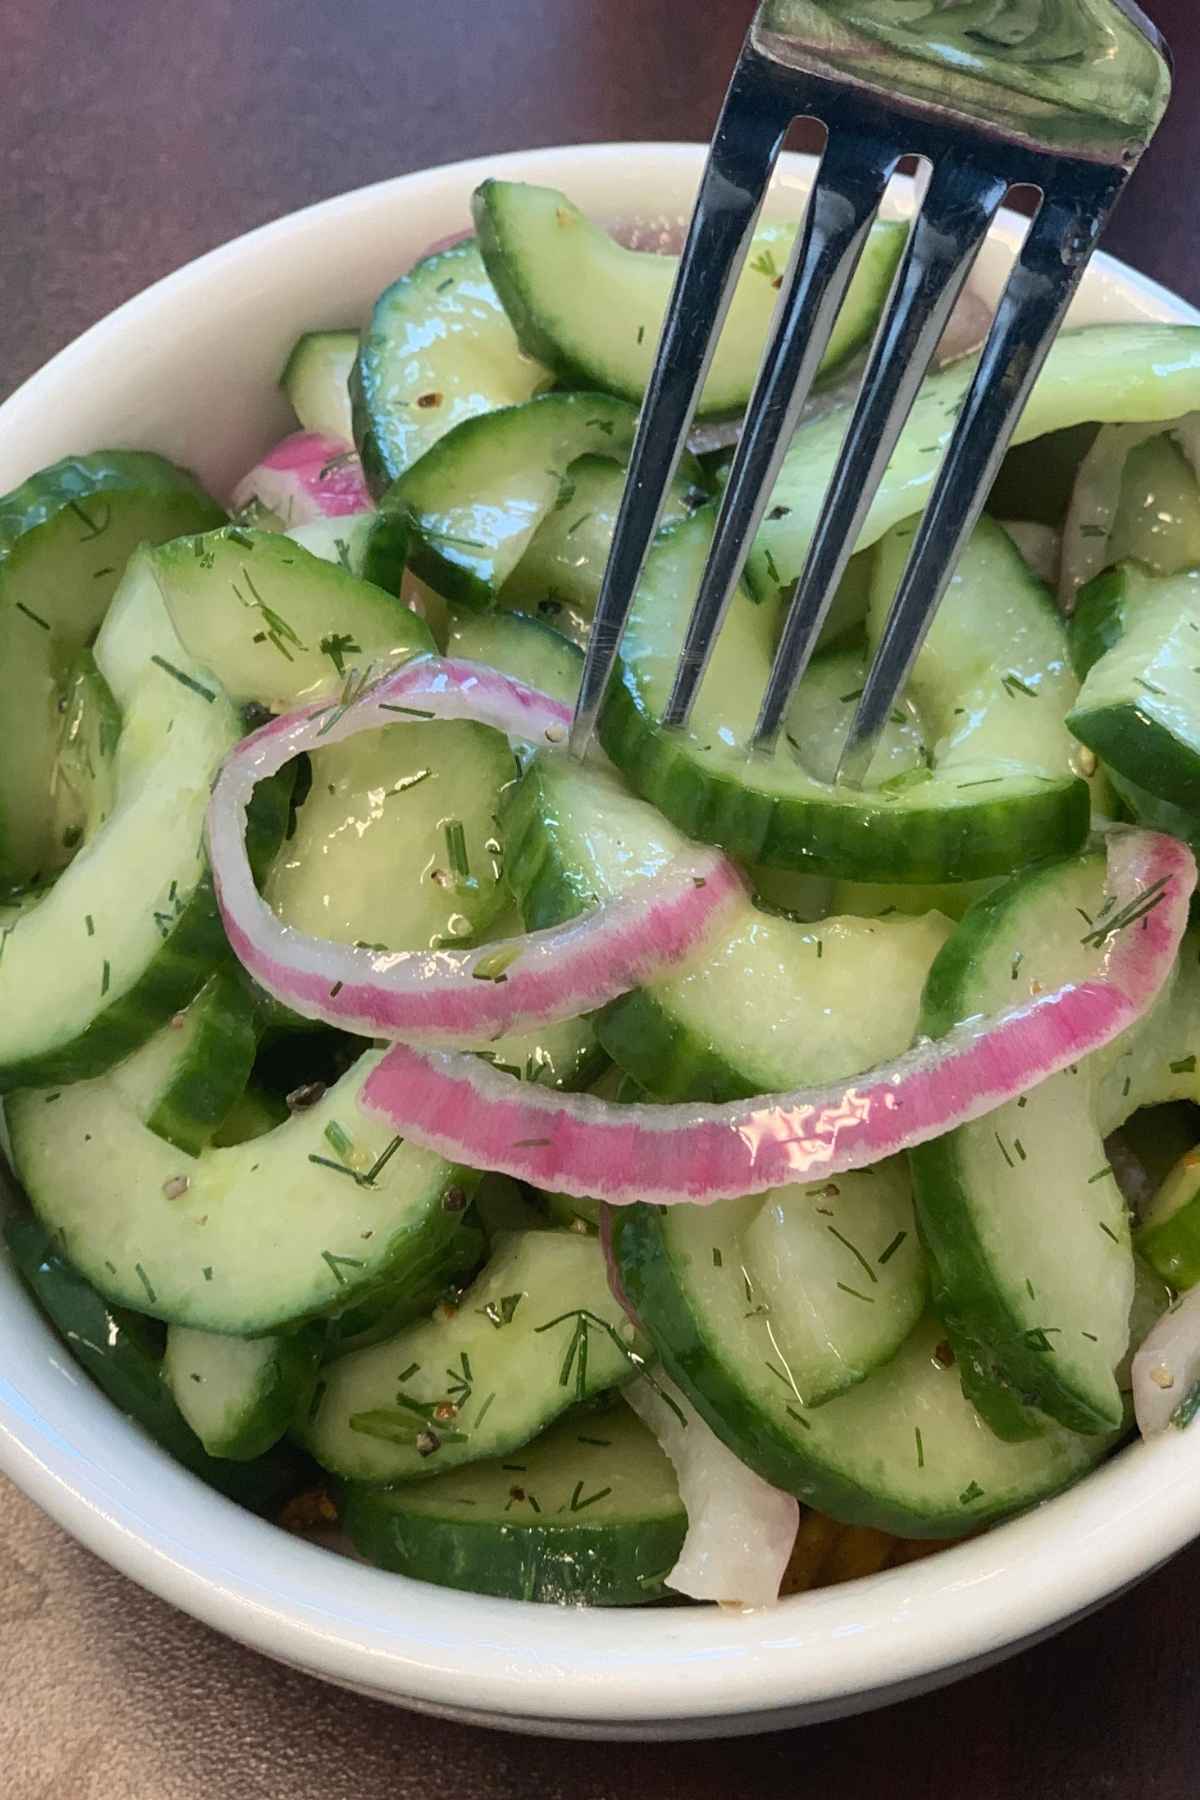 Old Fashioned Cucumbers and Onions in Vinegar are refreshing, flavorful, and refreshing. It comes together quickly and with just a few simple ingredients.